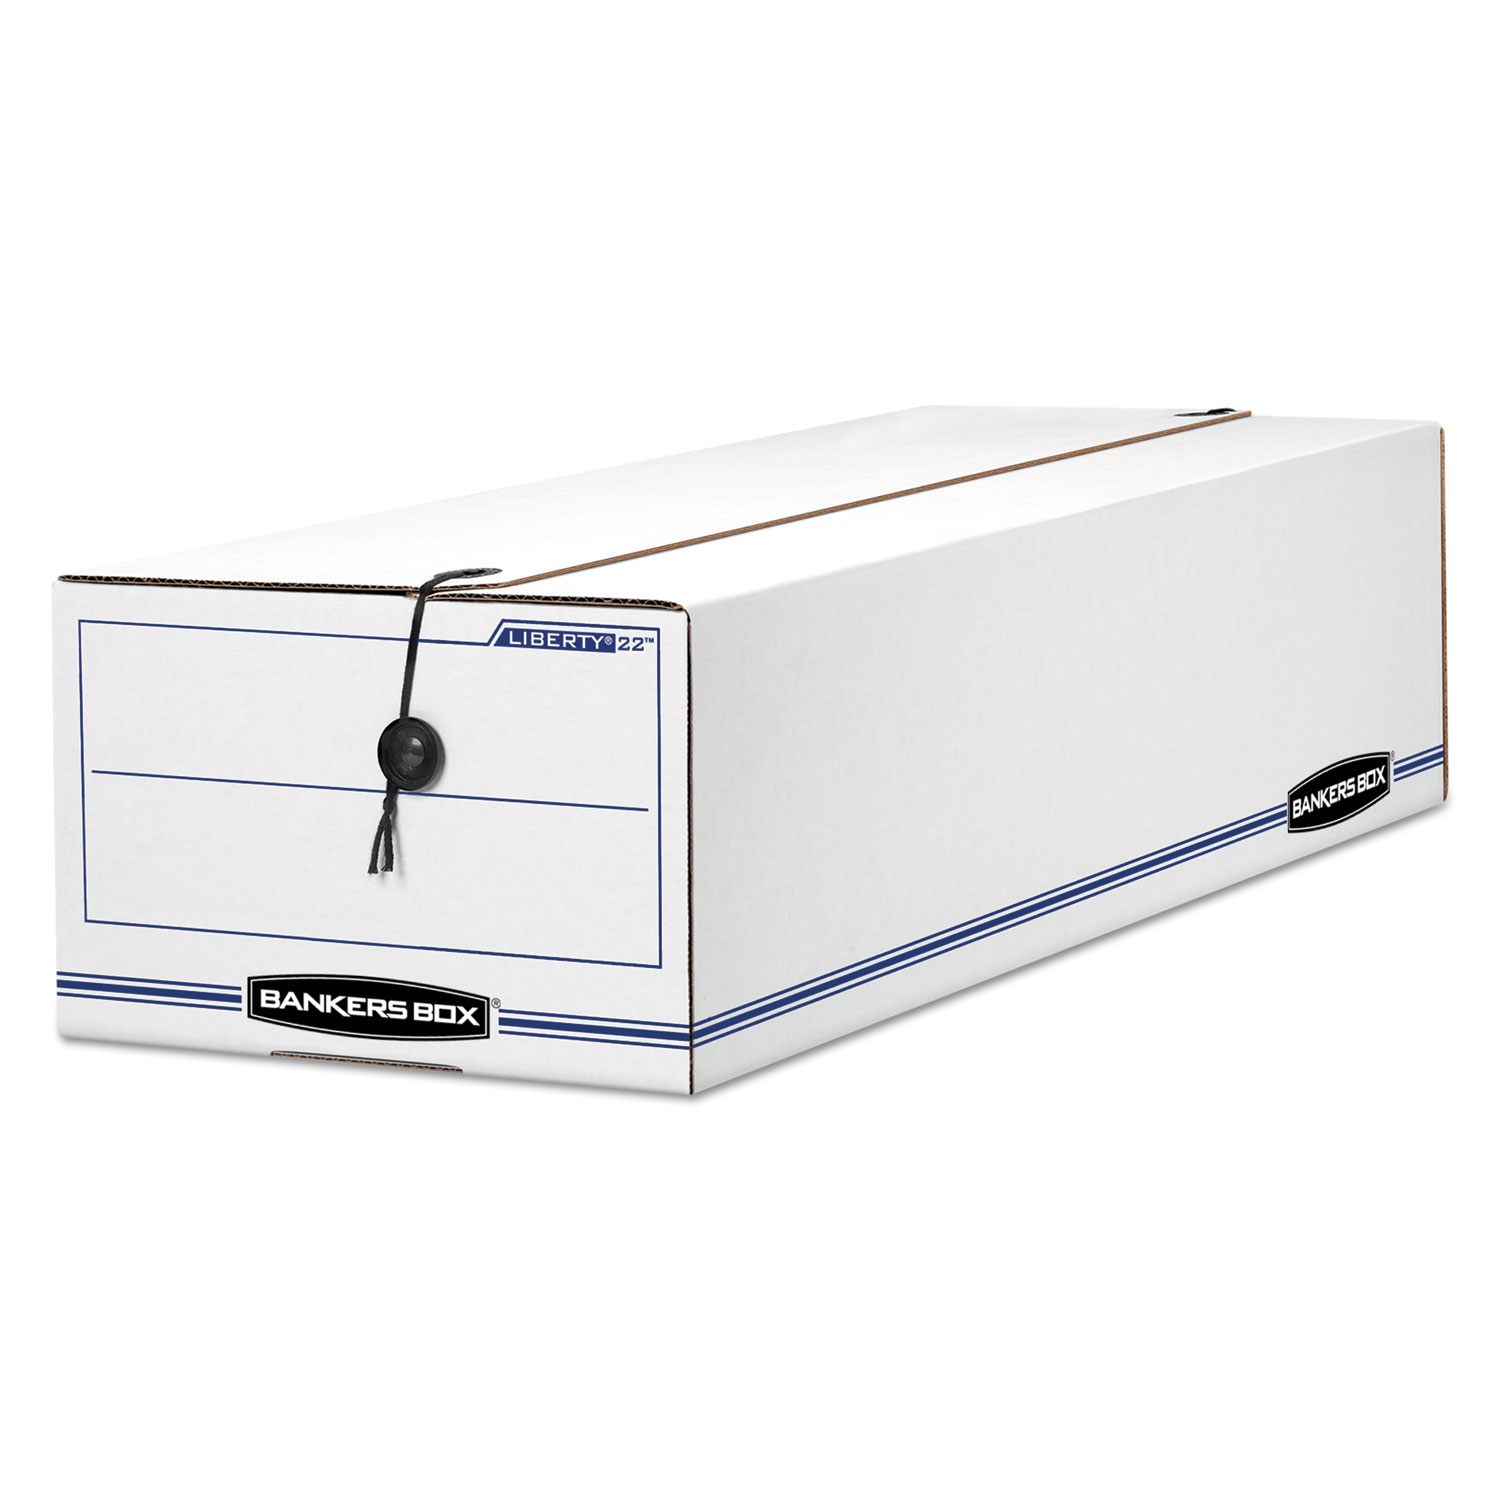  Bankers Box 00018 LIBERTY Check and Form Boxes, 9 x 24.25 x 7.5, White/Blue, 12/Carton (FEL00018) 